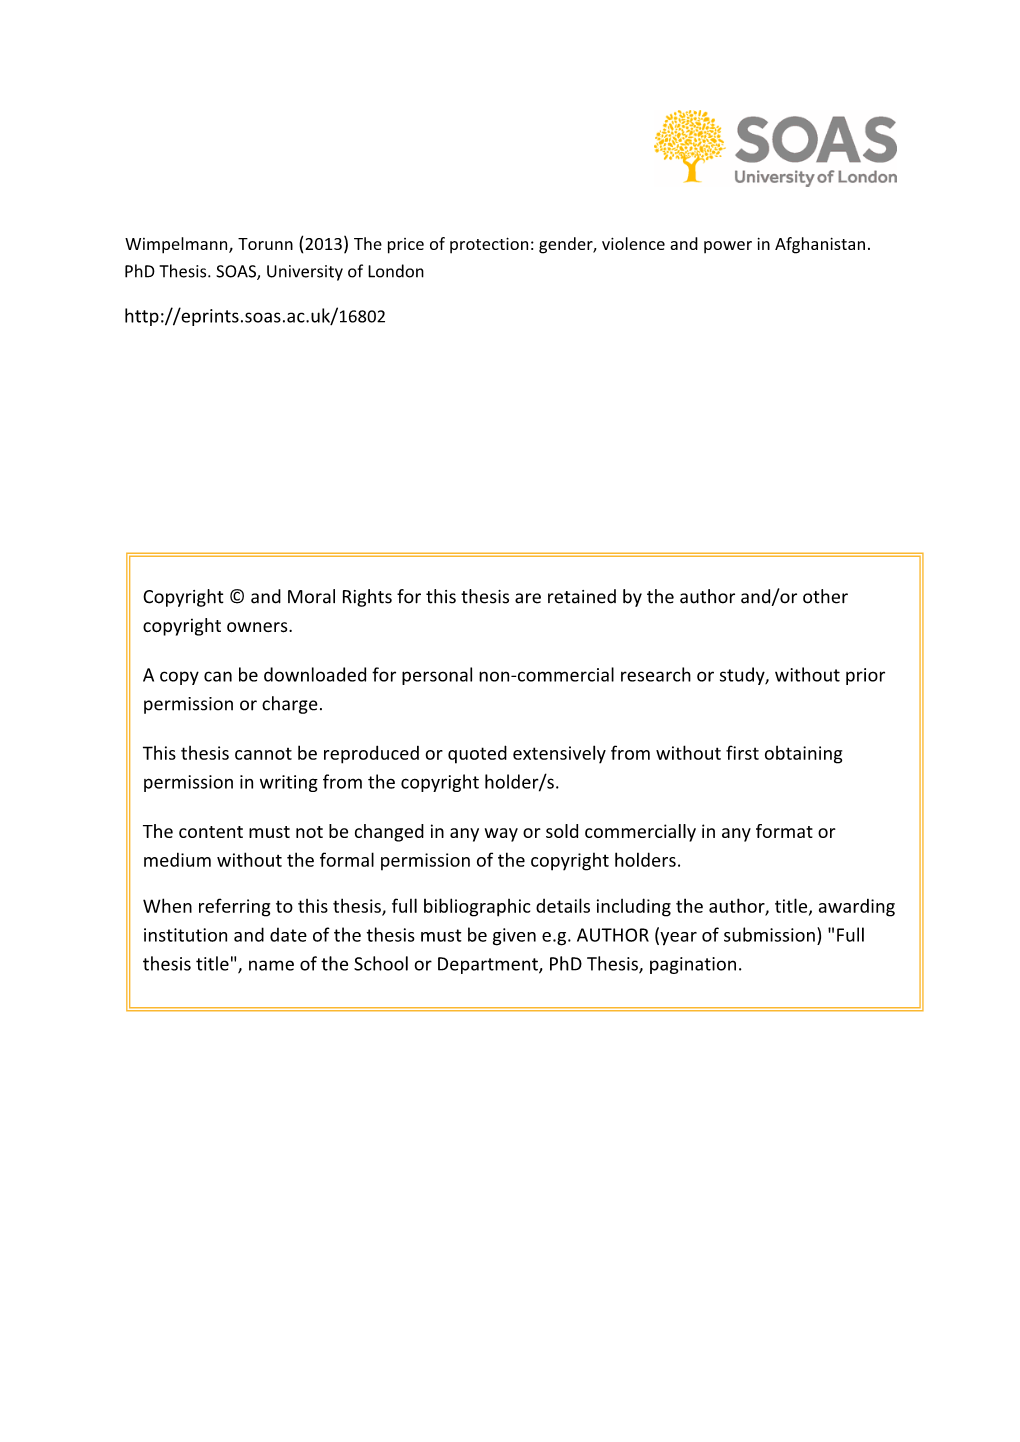 Copyright © and Moral Rights for This Thesis Are Retained by the Author And/Or Other Copyright